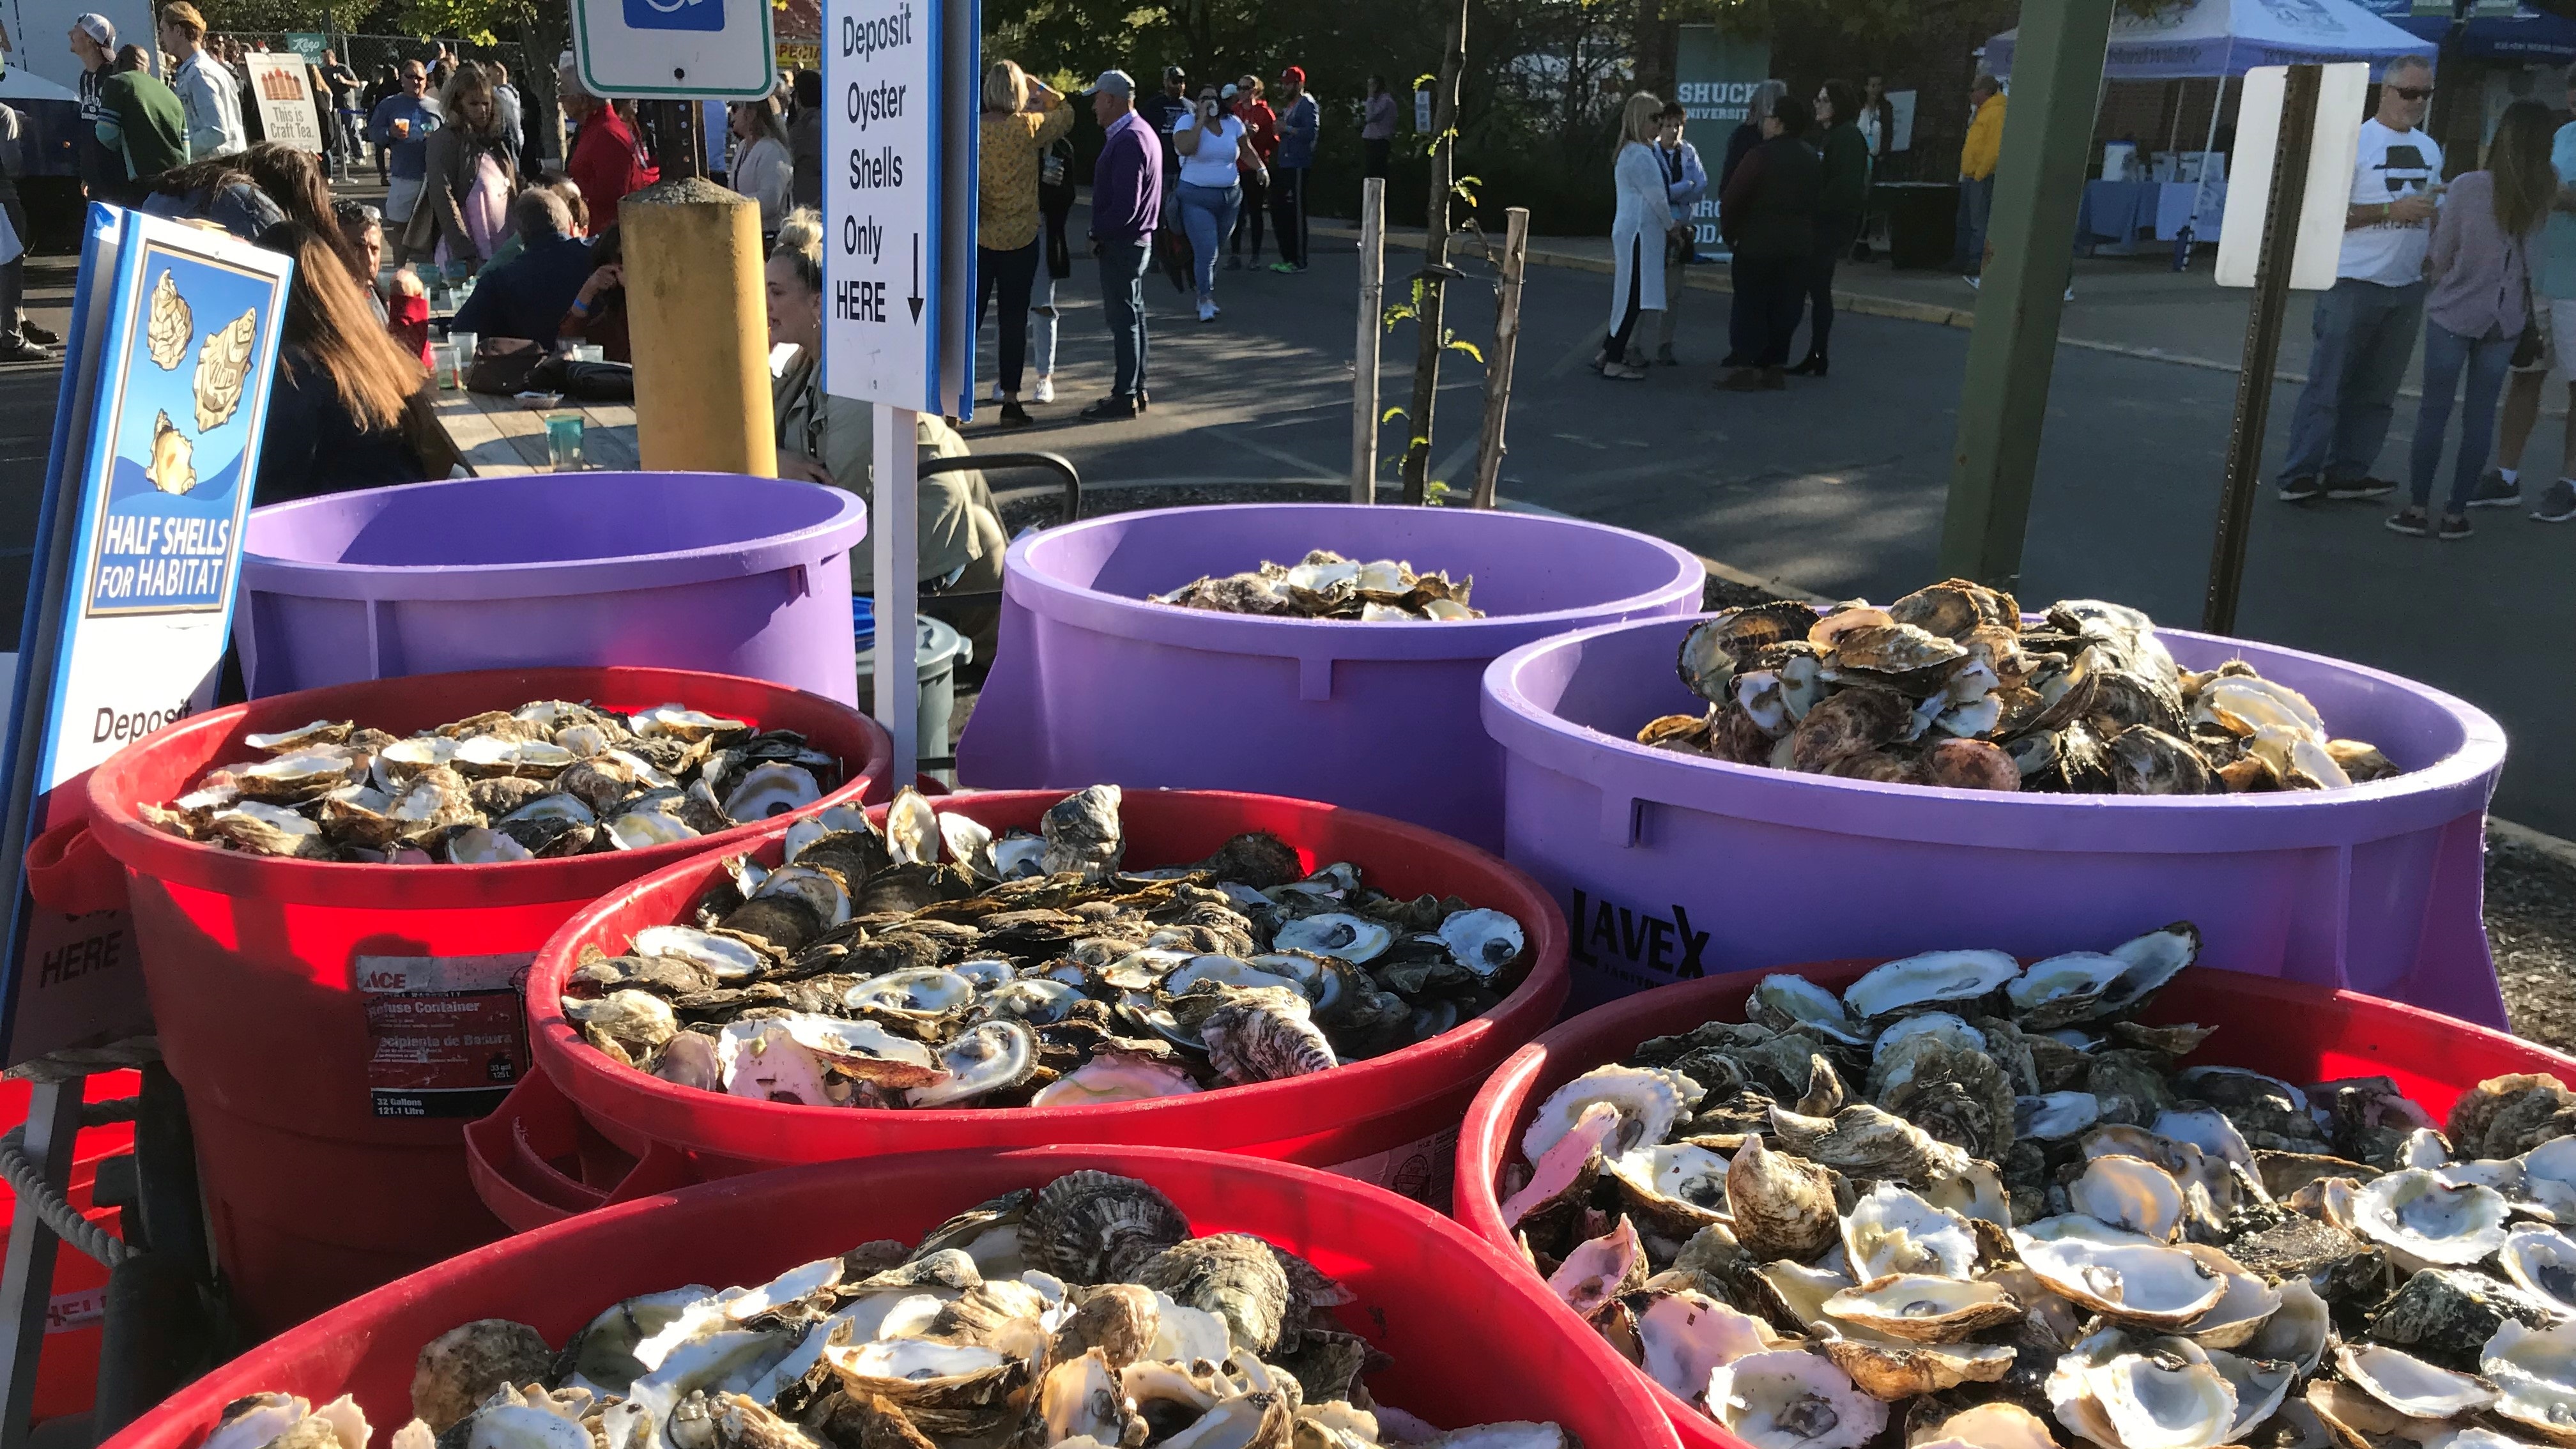 Large bins of oyster shells await recycling at a fundraising event for the Seatuck Environmental Association on Long Island in 2019.